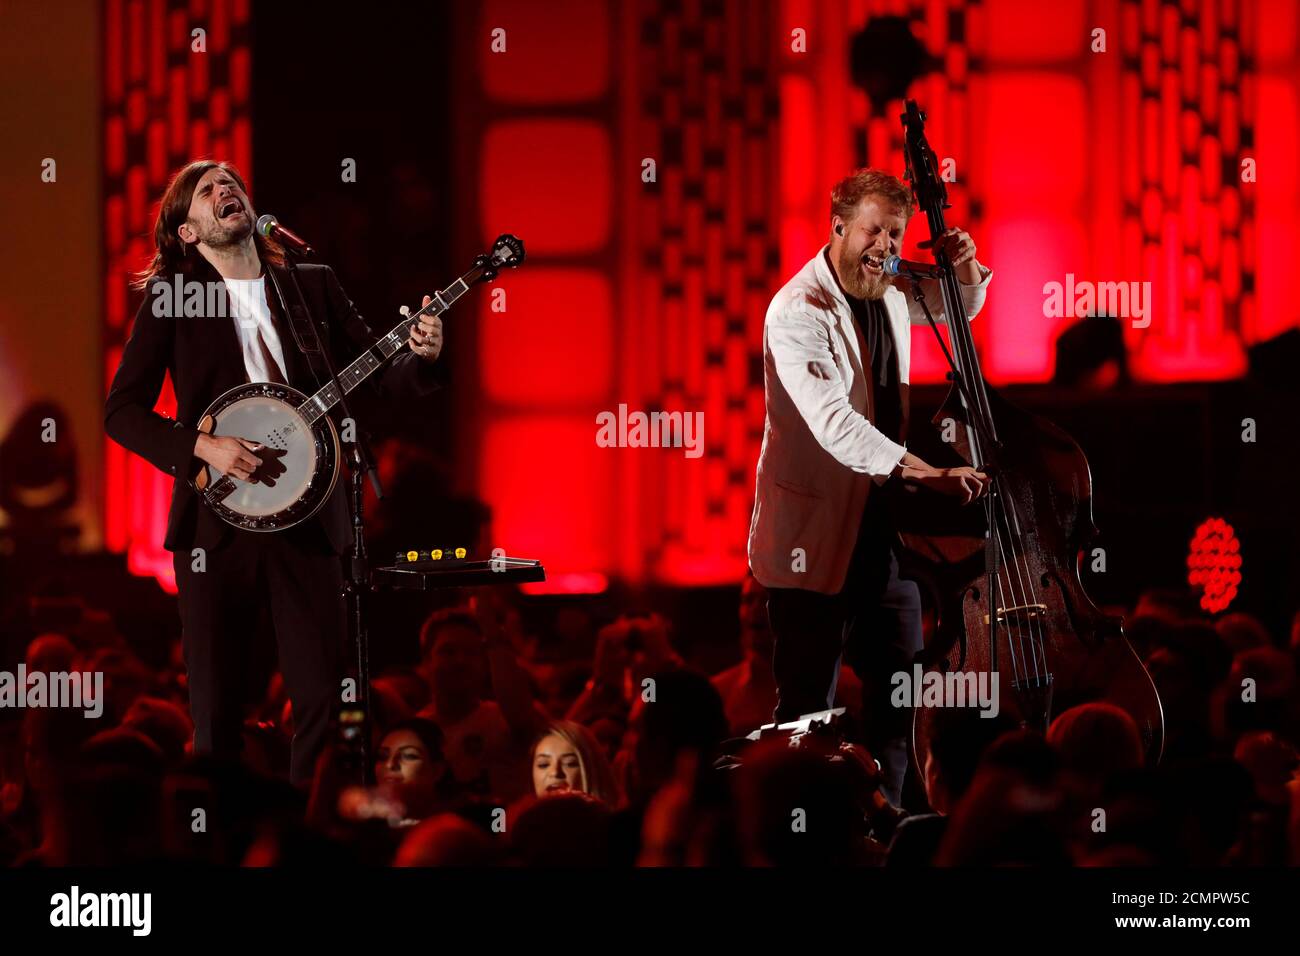 Mumford & Sons banjoist Winston Marshall (L) and bassist Ted Dwane perform during the iHeartRadio Music Festival at T-Mobile Arena in Las Vegas, Nevada, U.S. September 21, 2019. REUTERS/Steve Marcus Stock Photo